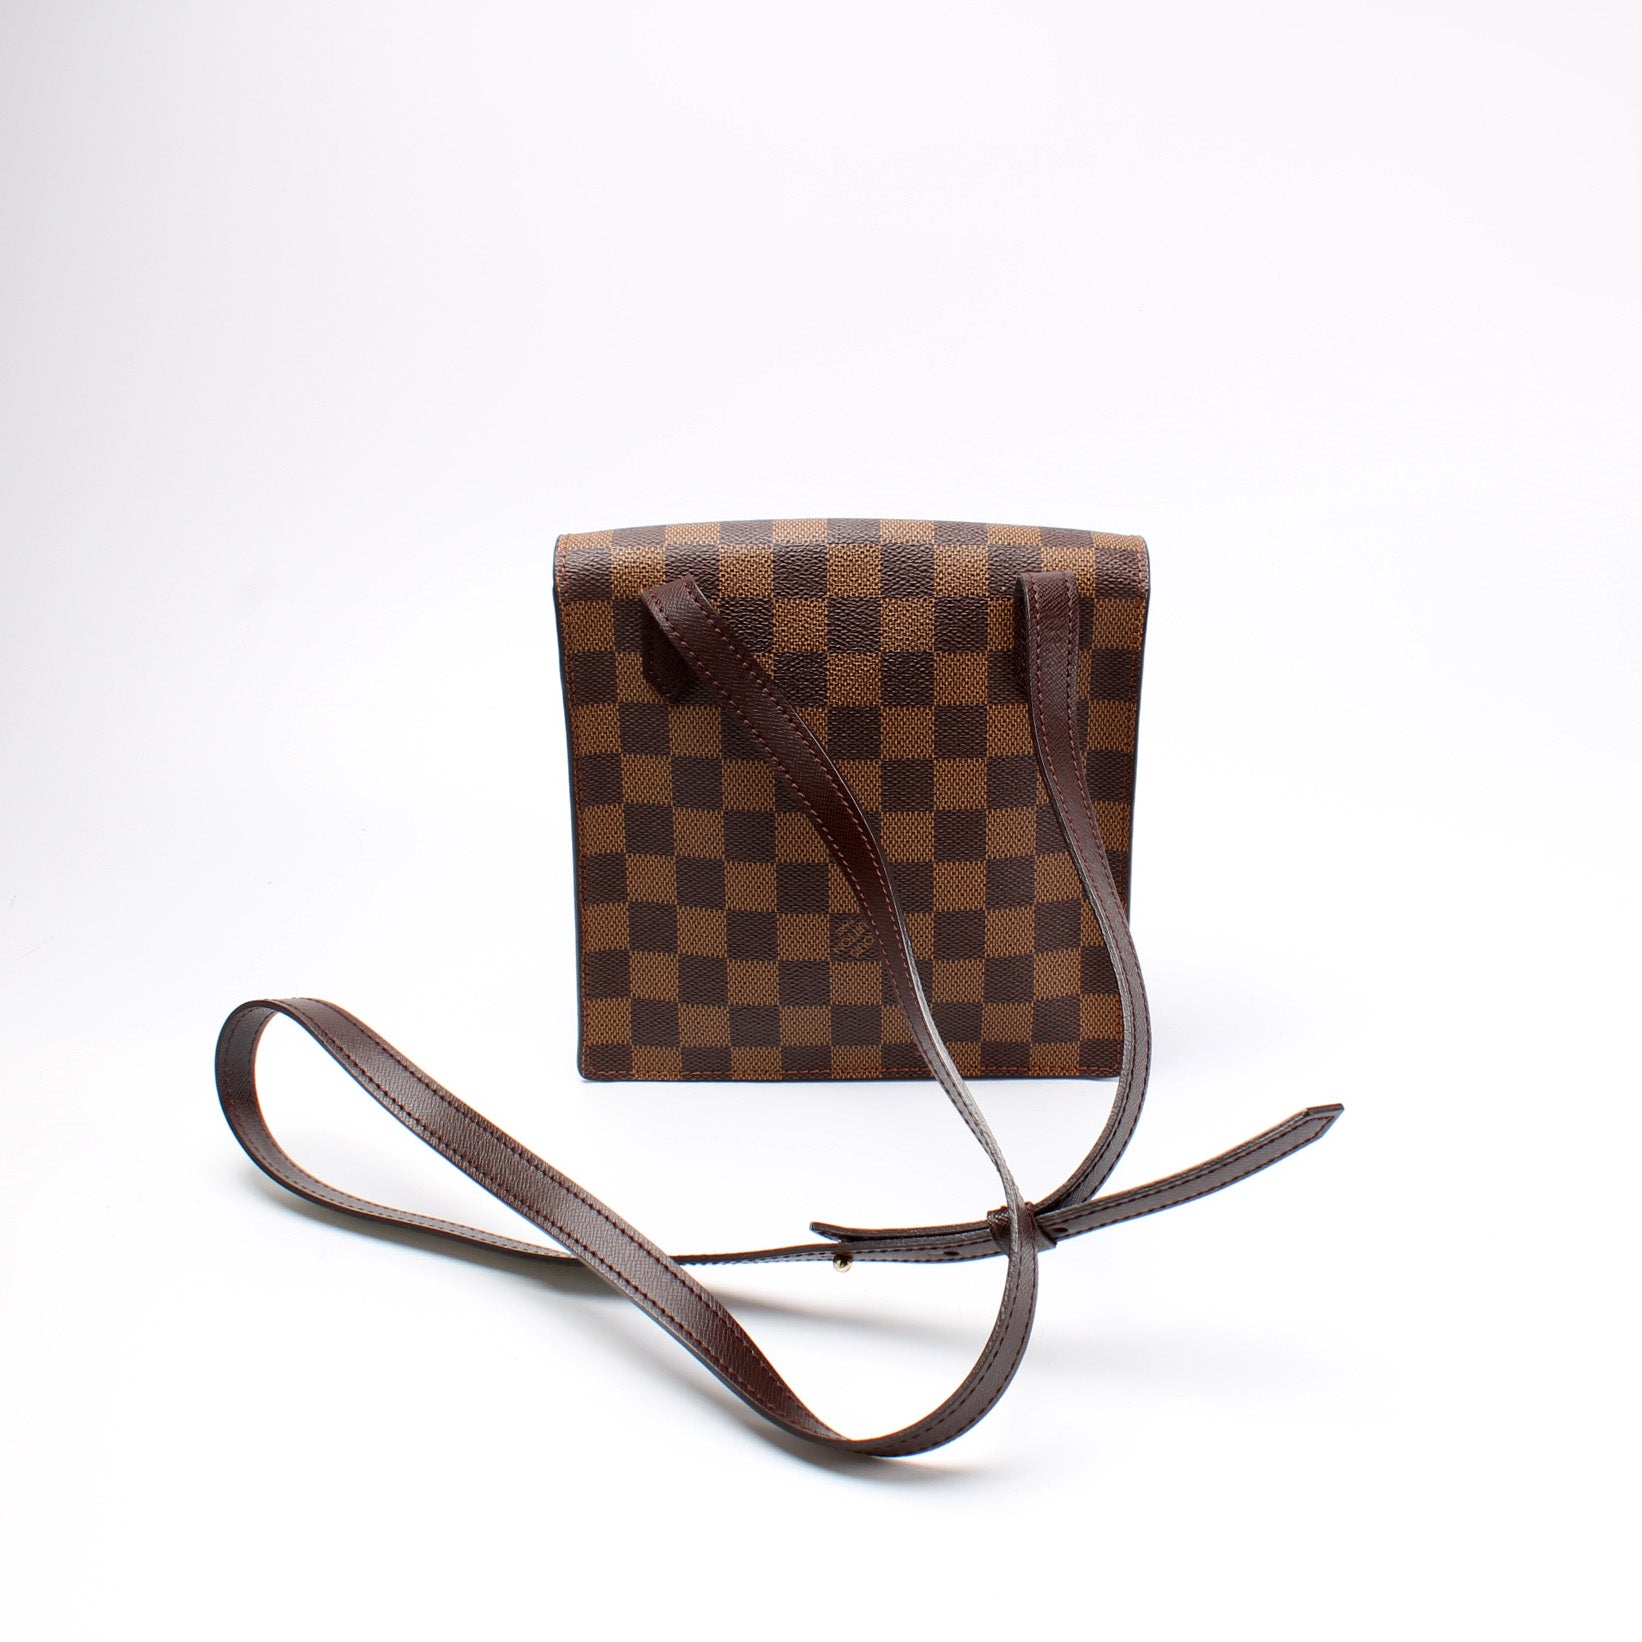 Louis Vuitton - Authenticated Pimlico Handbag - Leather Brown for Women, Good Condition